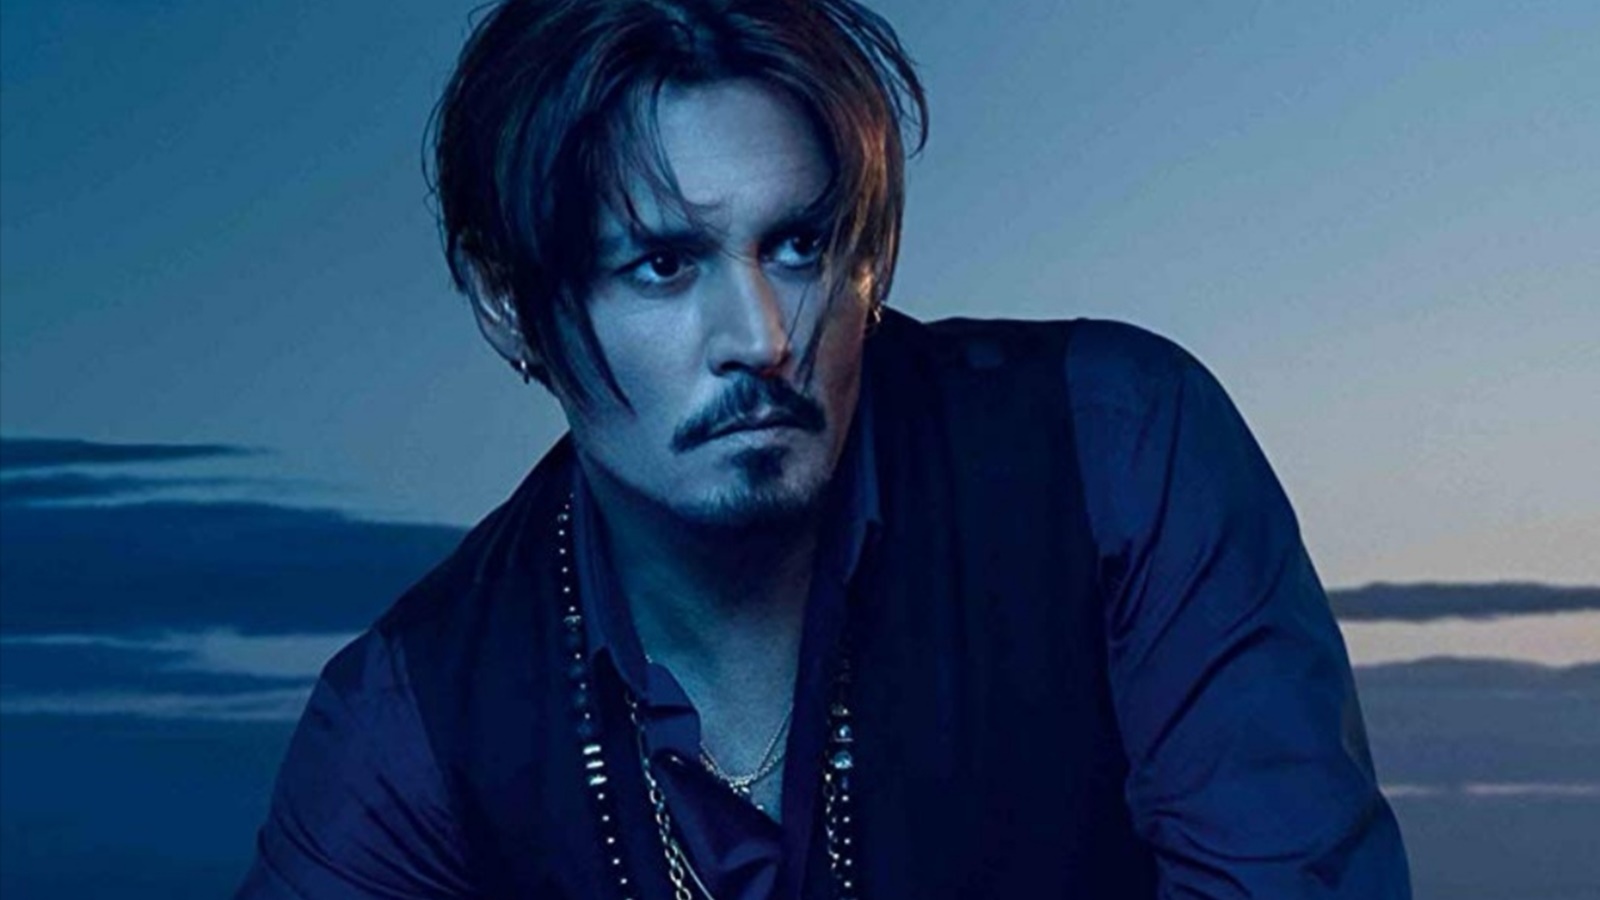 Johnny Depp strikes a record million dollar deal with Dior